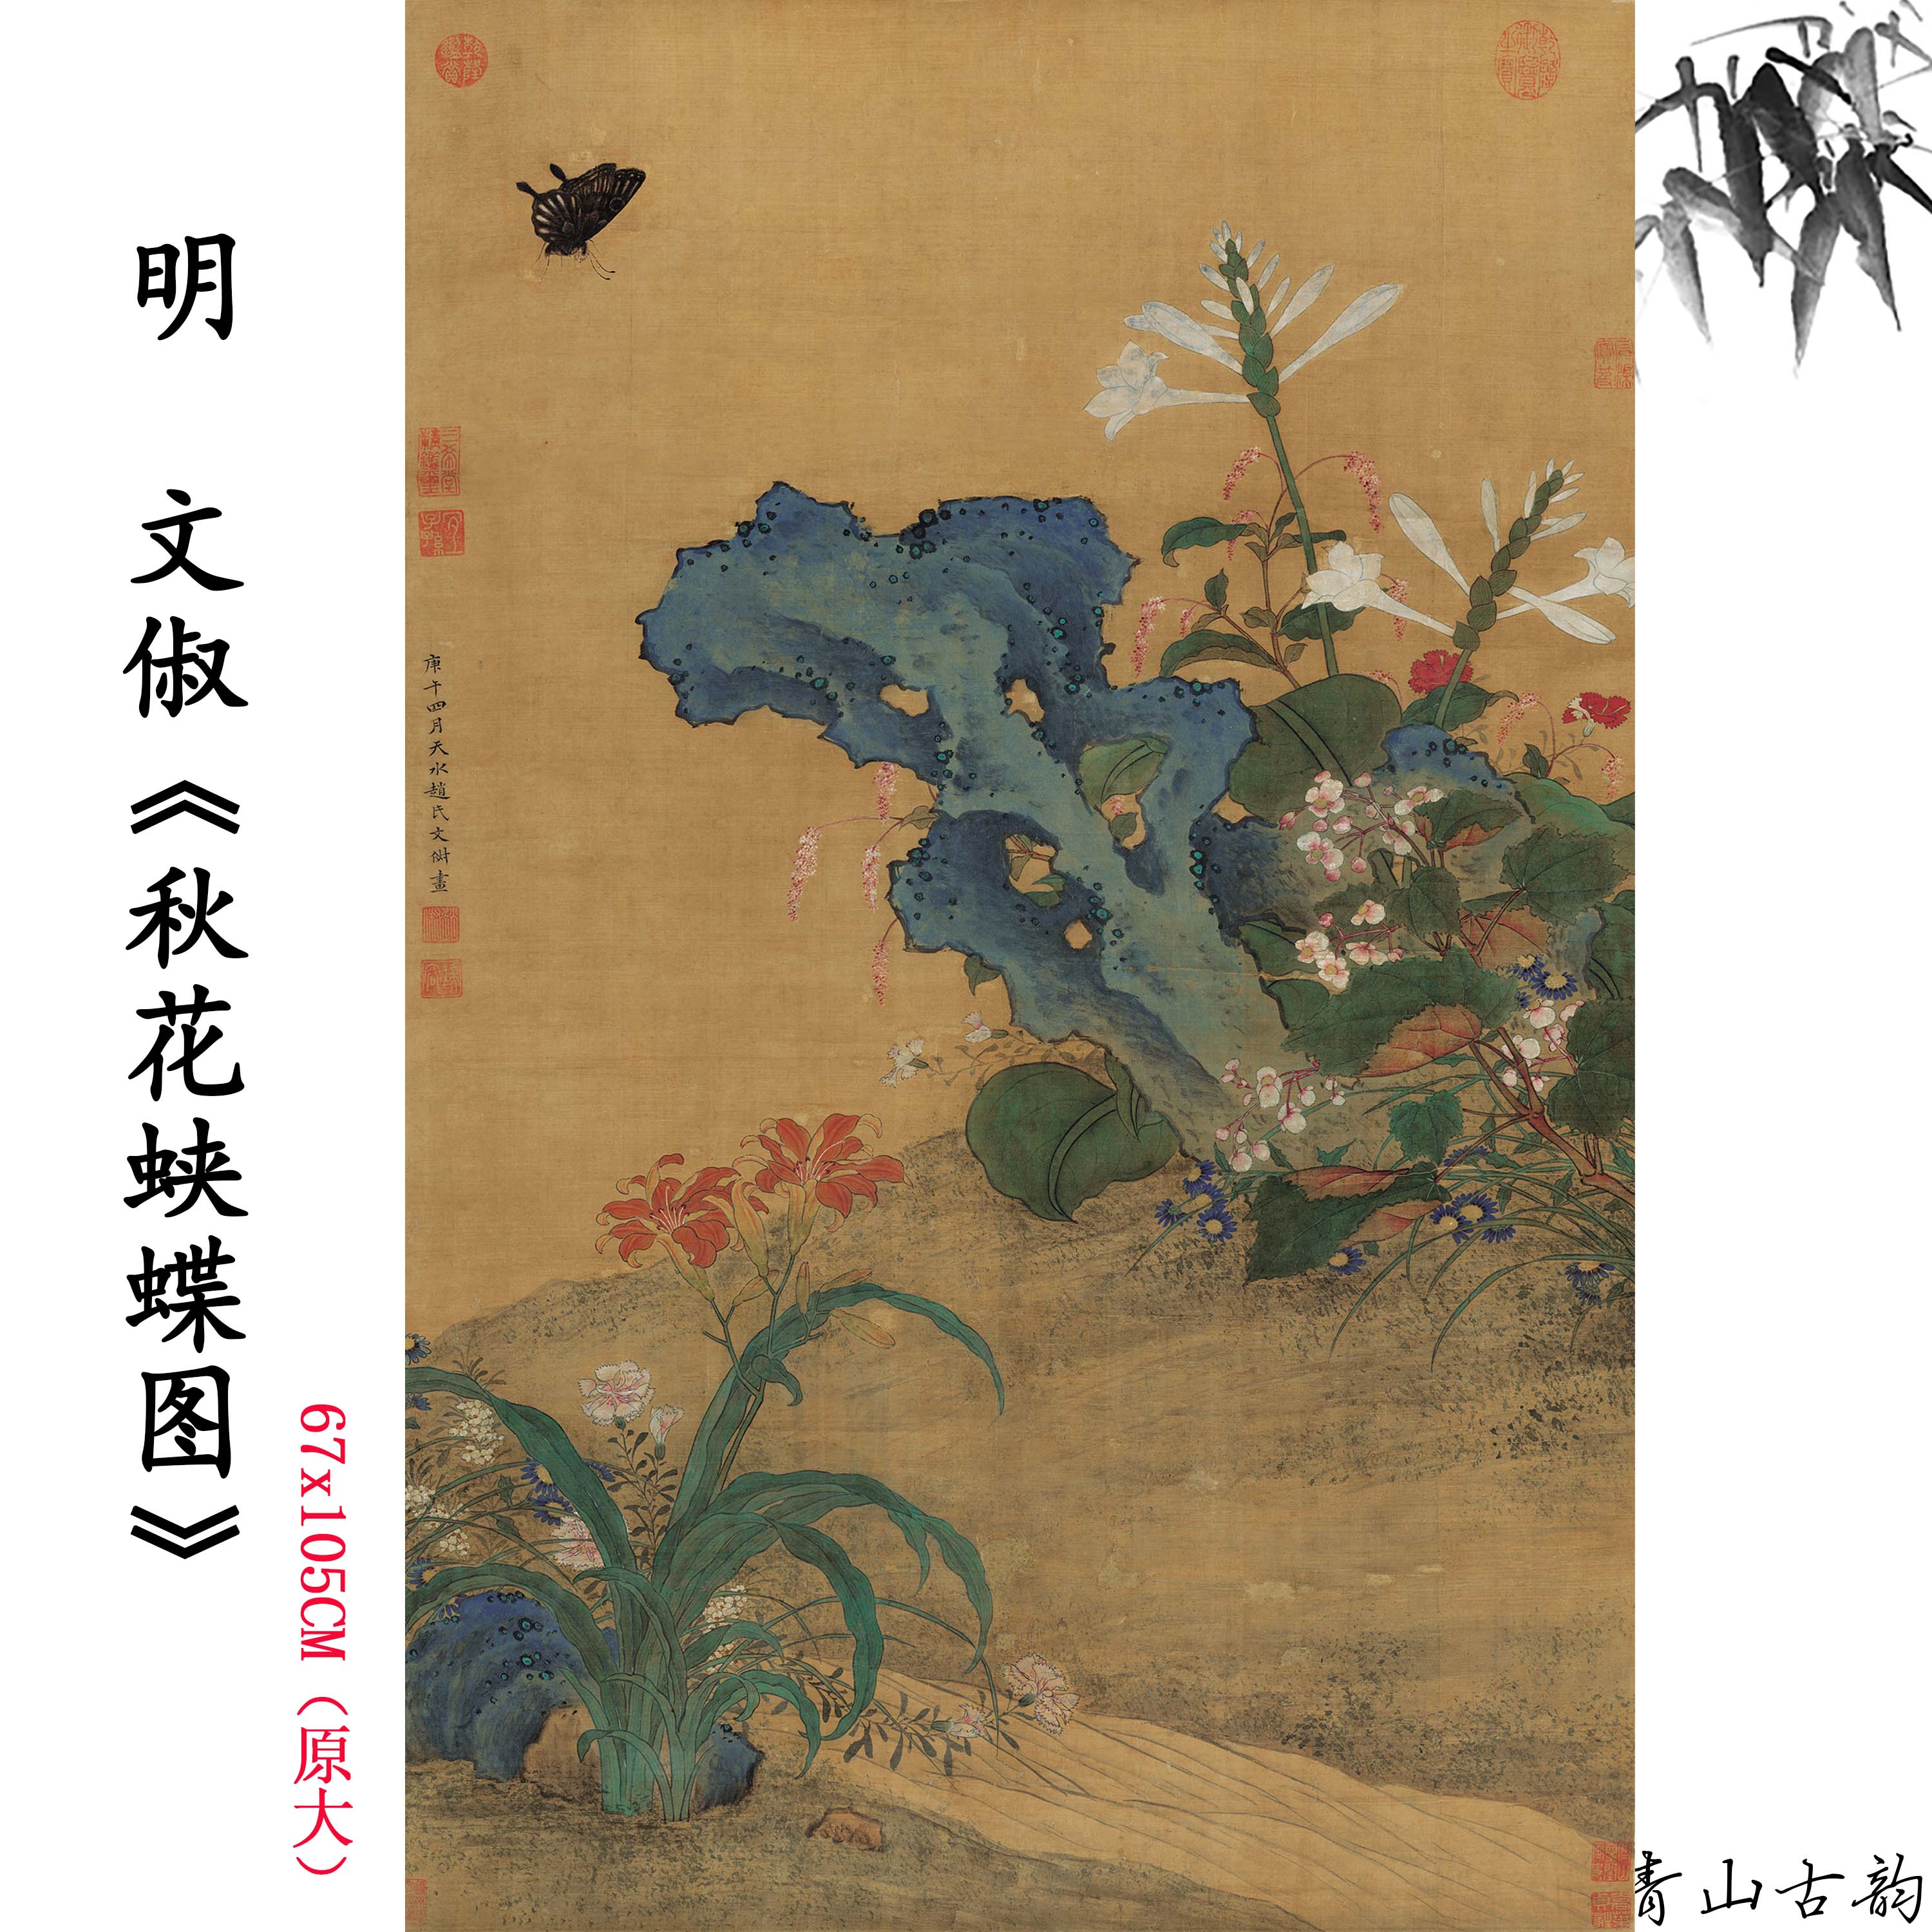 Chinese Antique Art Painting 明 文俶 秋花蛱蝶图 Ming Wen Chu Flower Butterfly